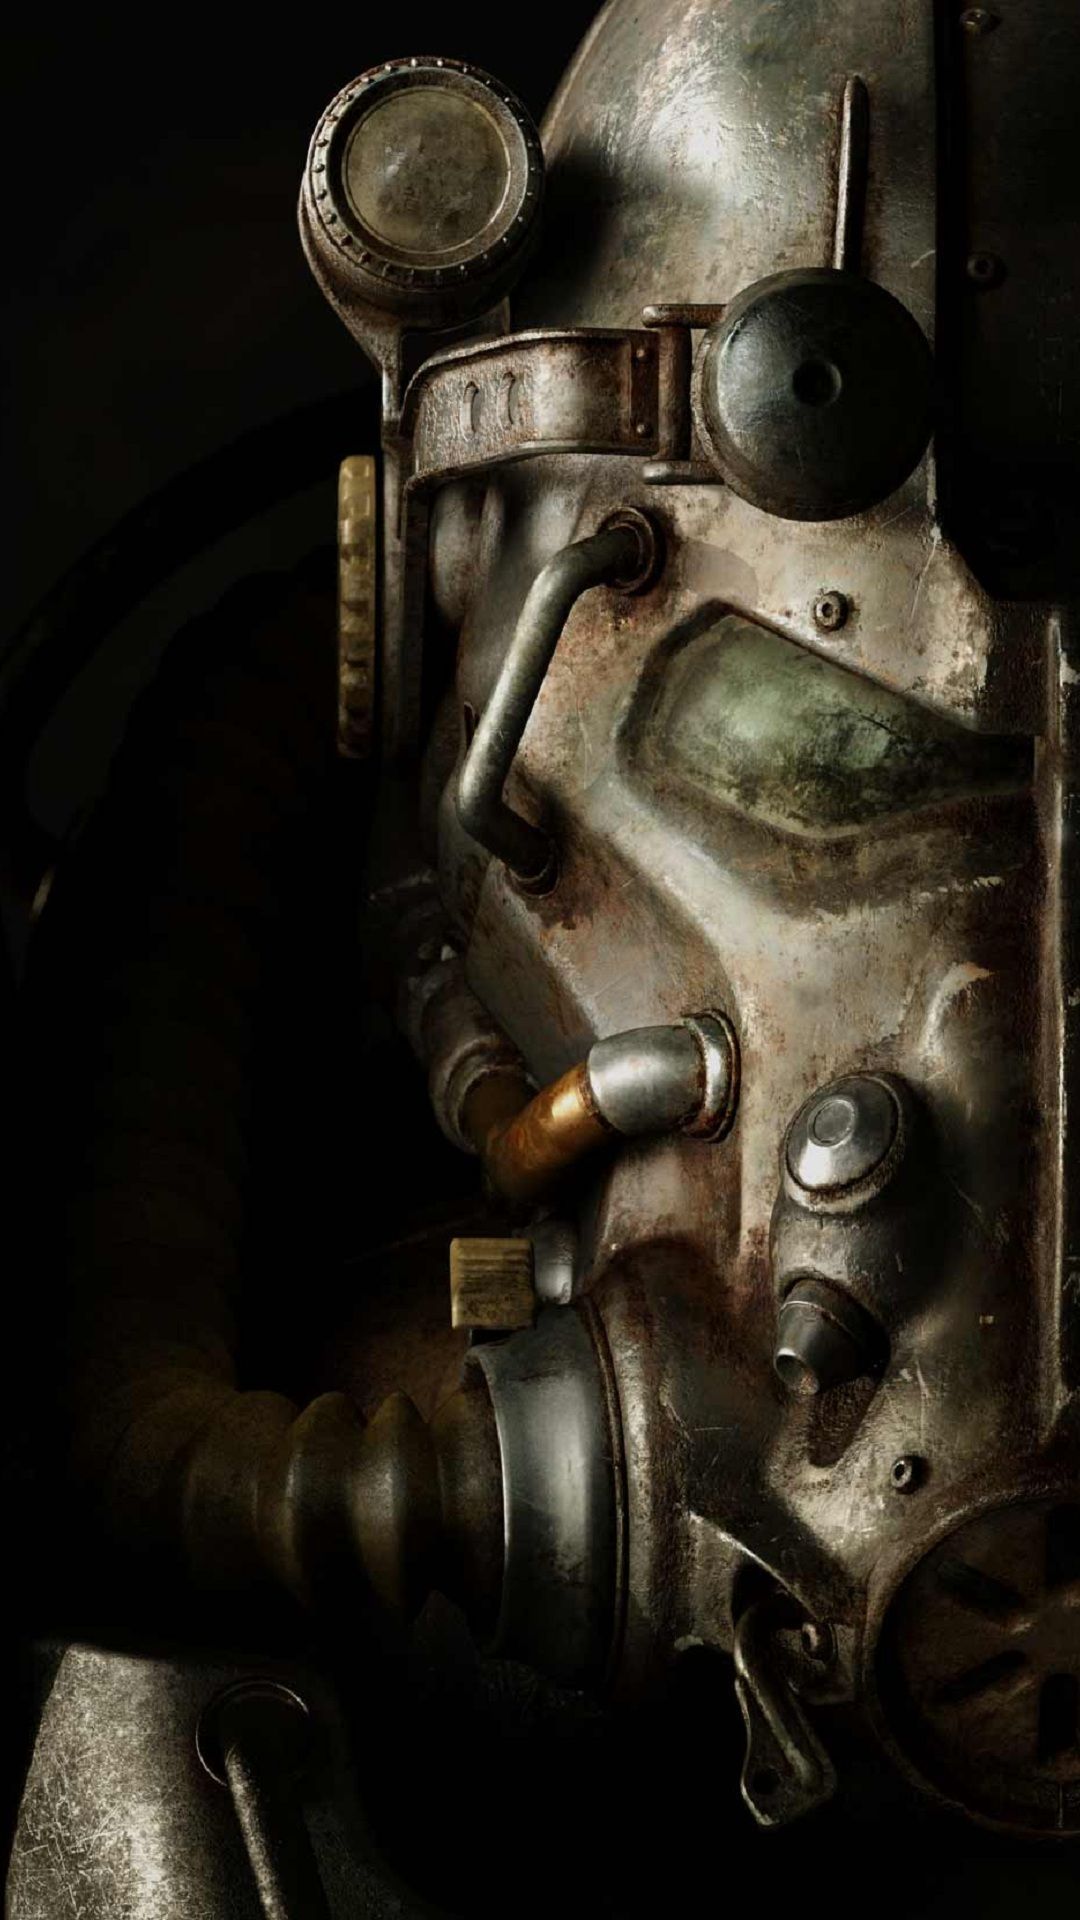 Fallout 4 Wallpaper Mobile Iphone 6s galaxy HD • iPhones Wallpapers